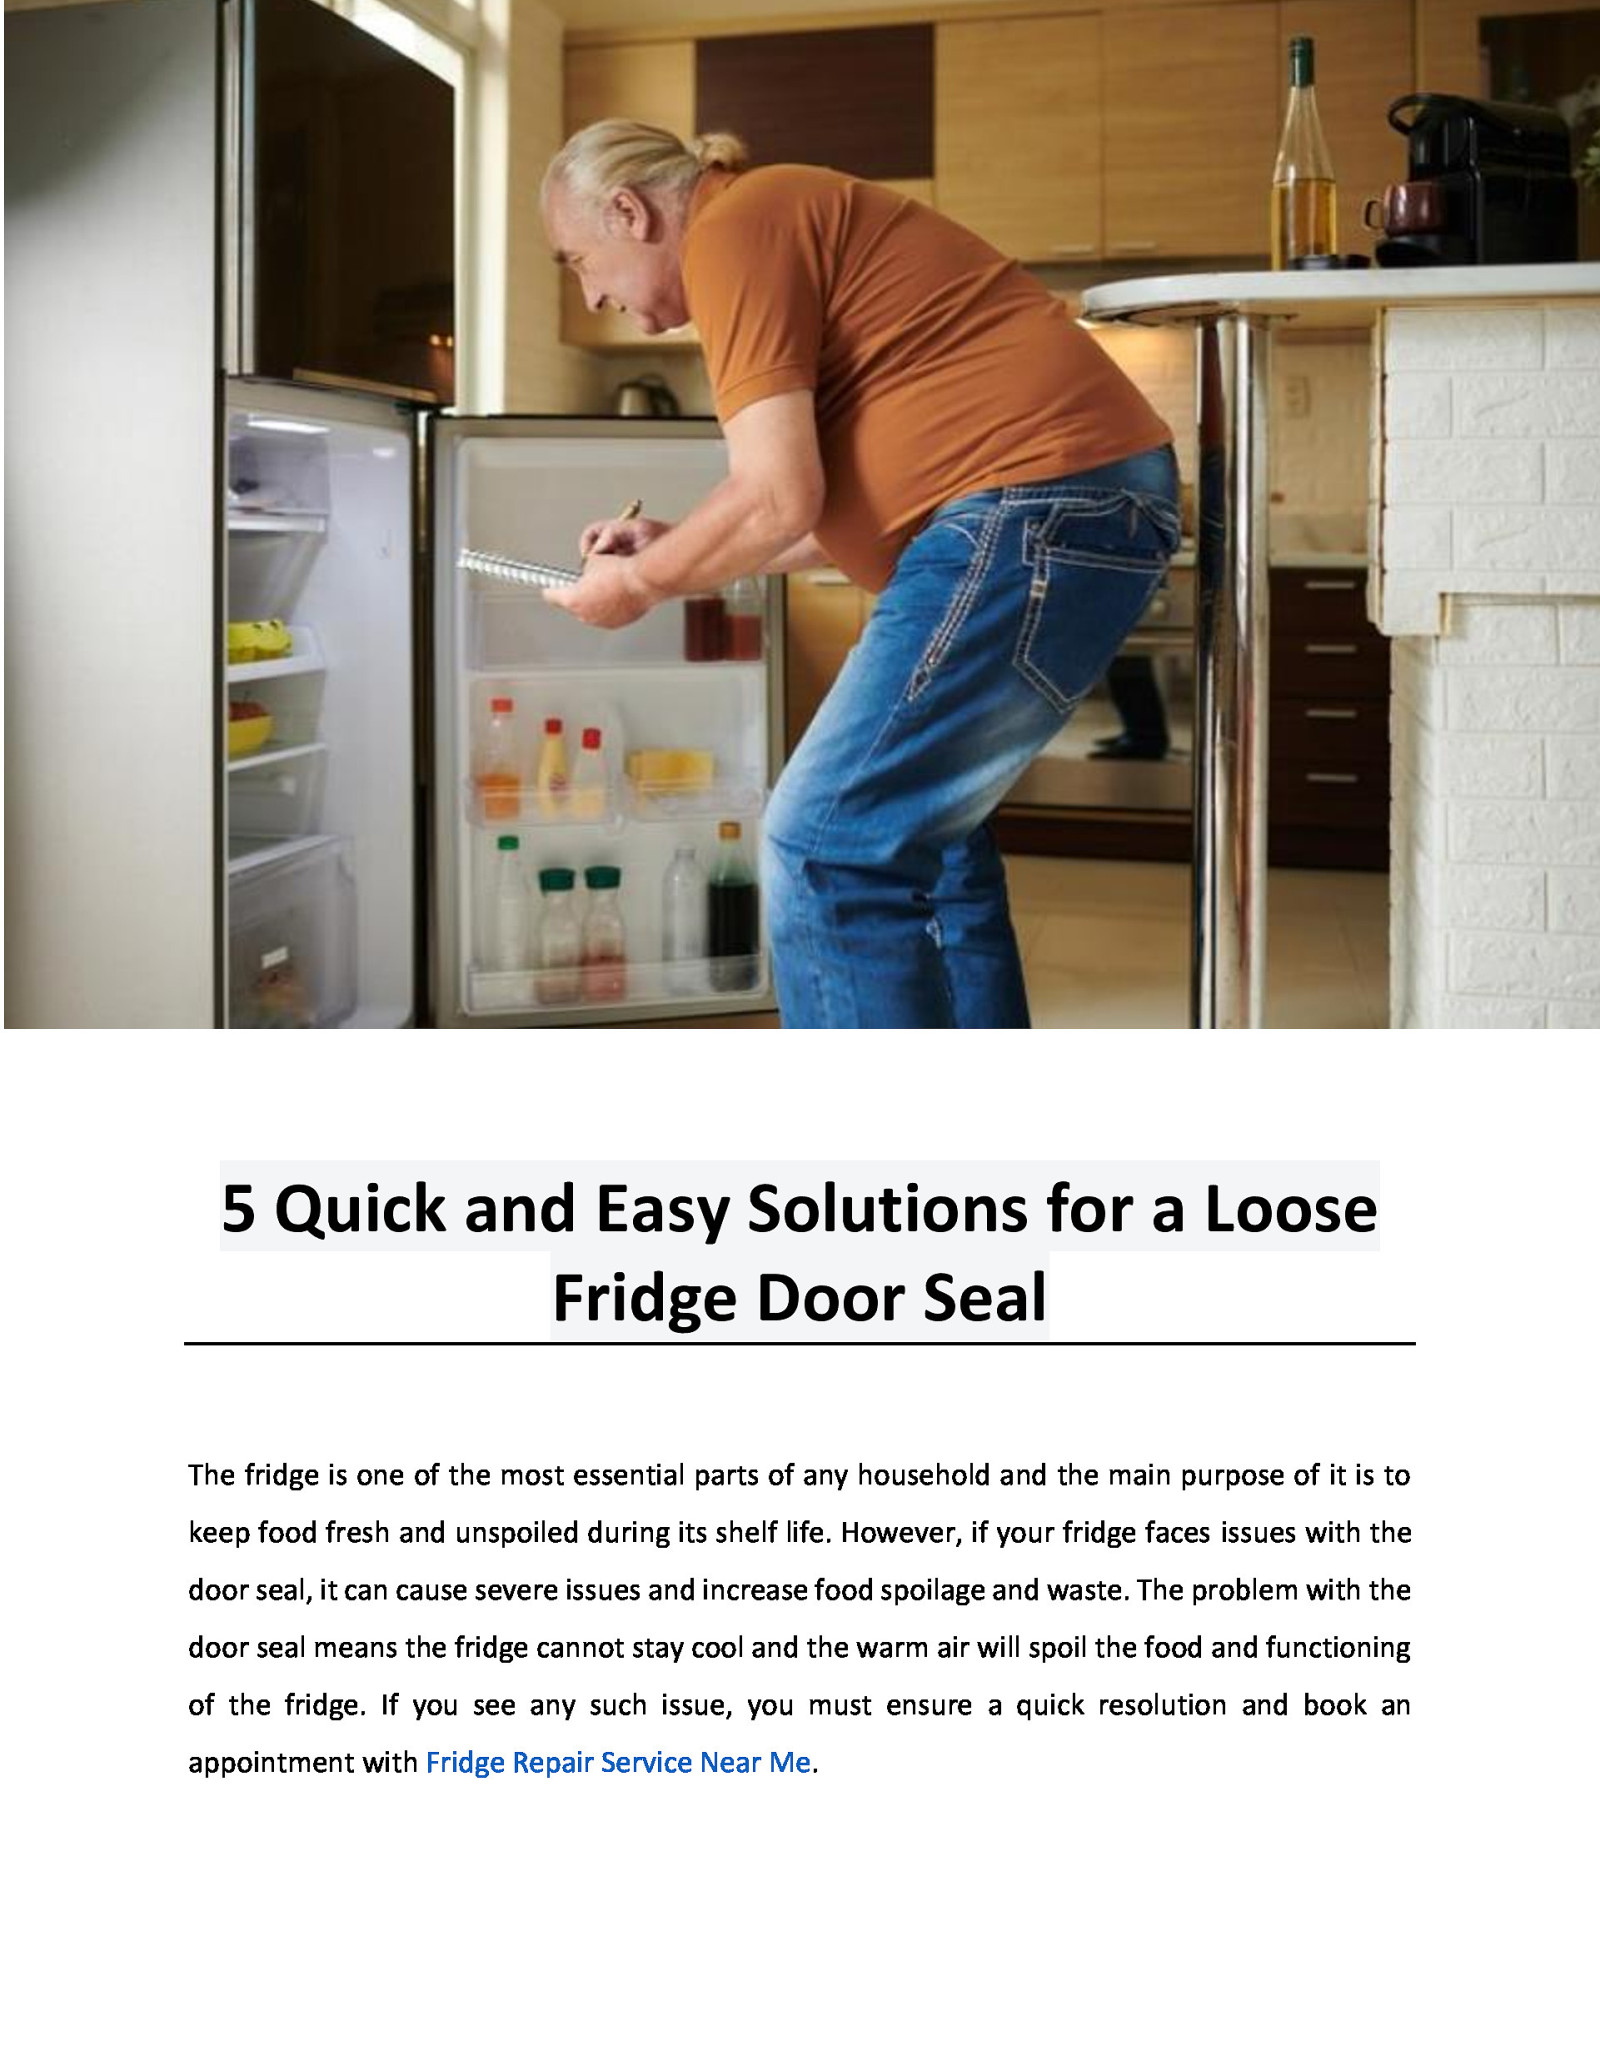 5 Quick and Easy Solutions for a Loose Fridge Door Seal